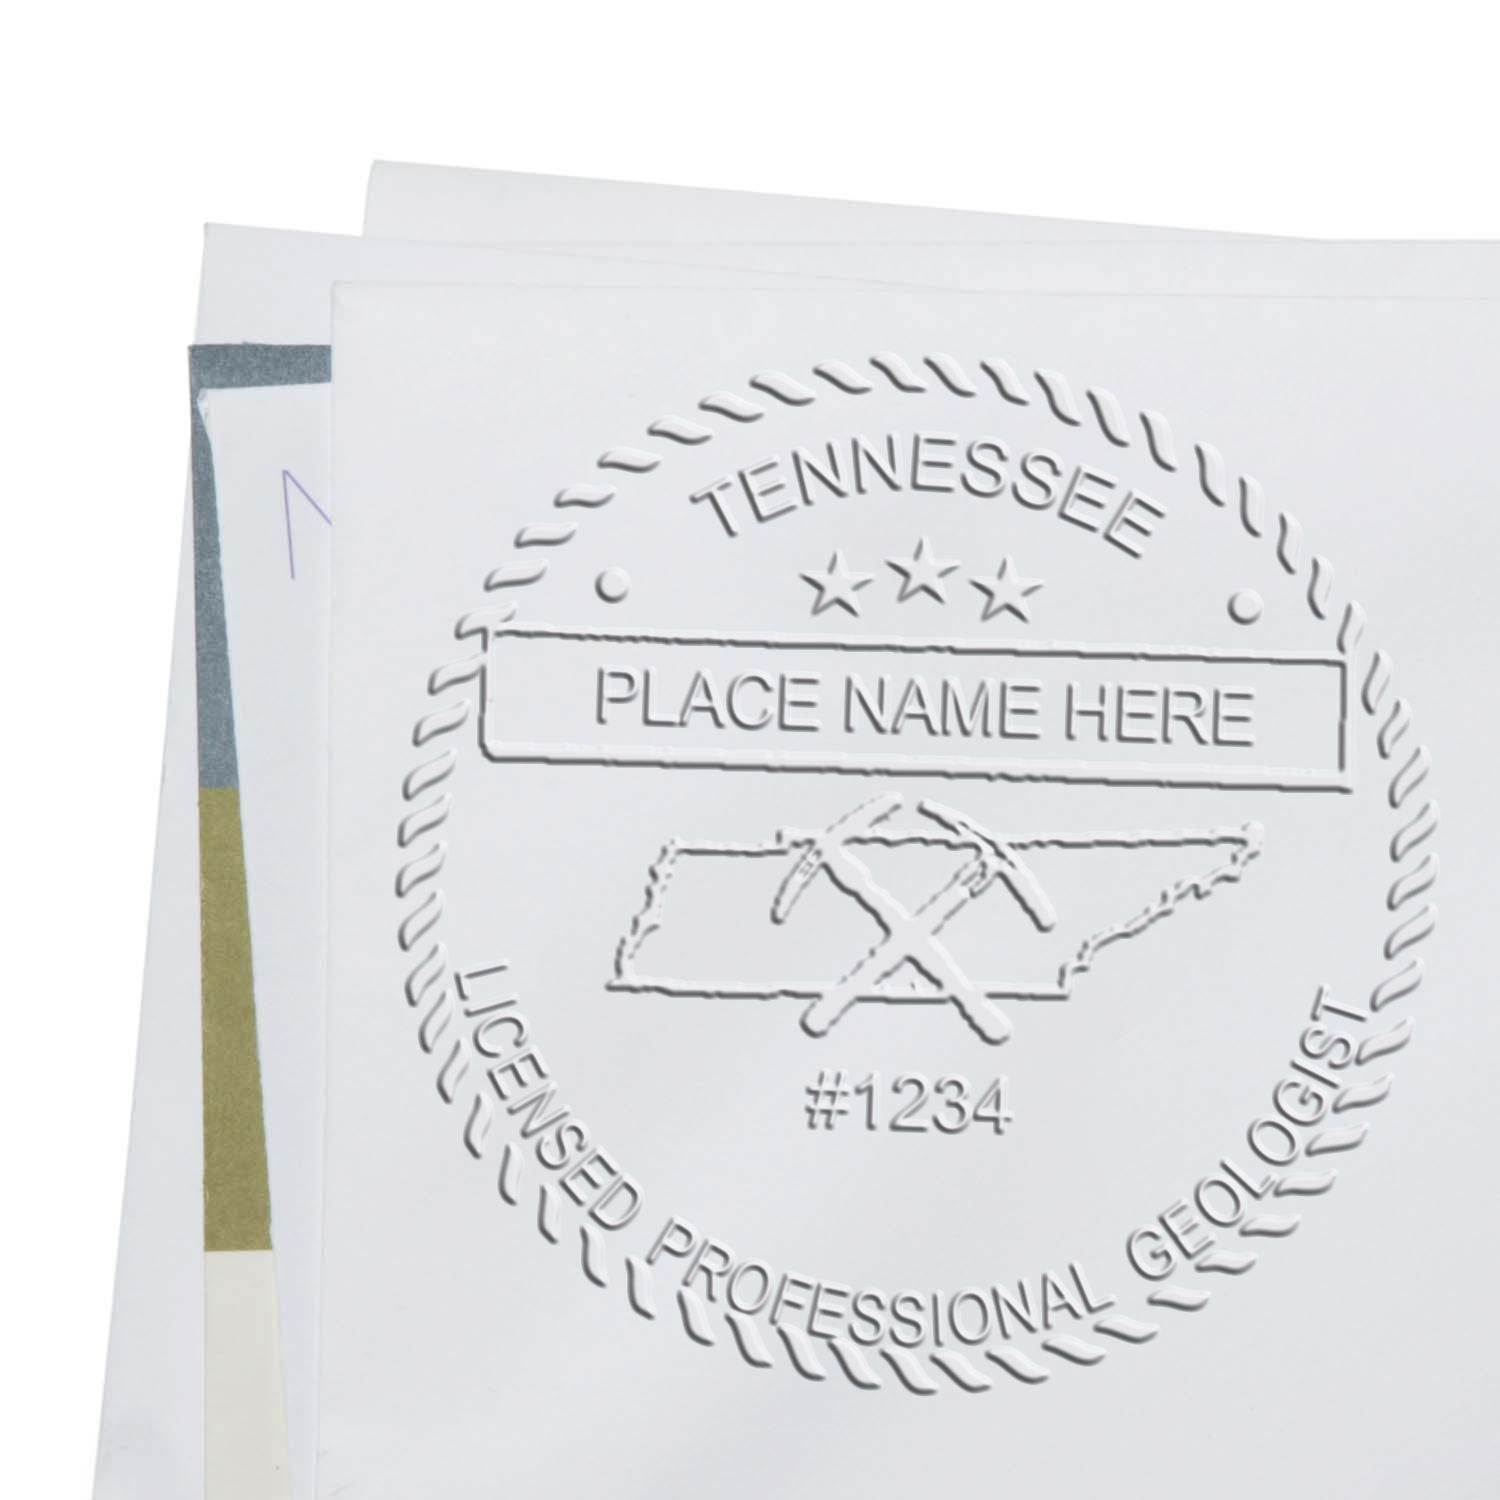 The main image for the Long Reach Tennessee Geology Seal depicting a sample of the imprint and imprint sample